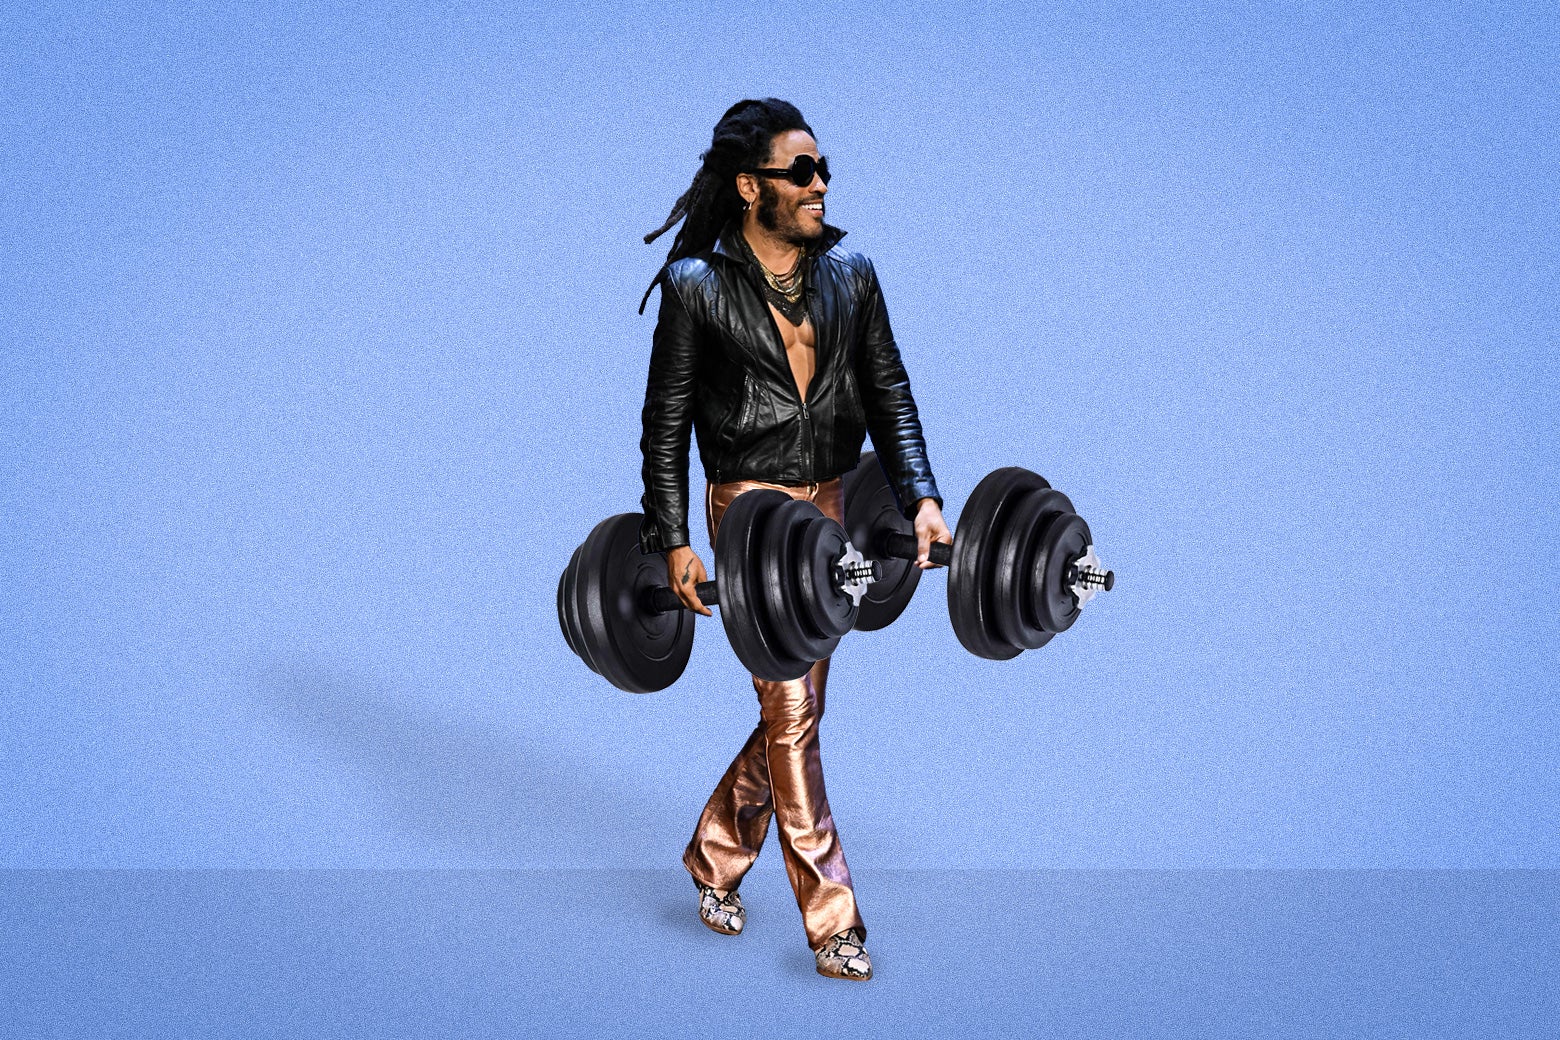 I Tried to Work Out Like Lenny Kravitz. Now I’m Having an Existential Crisis.